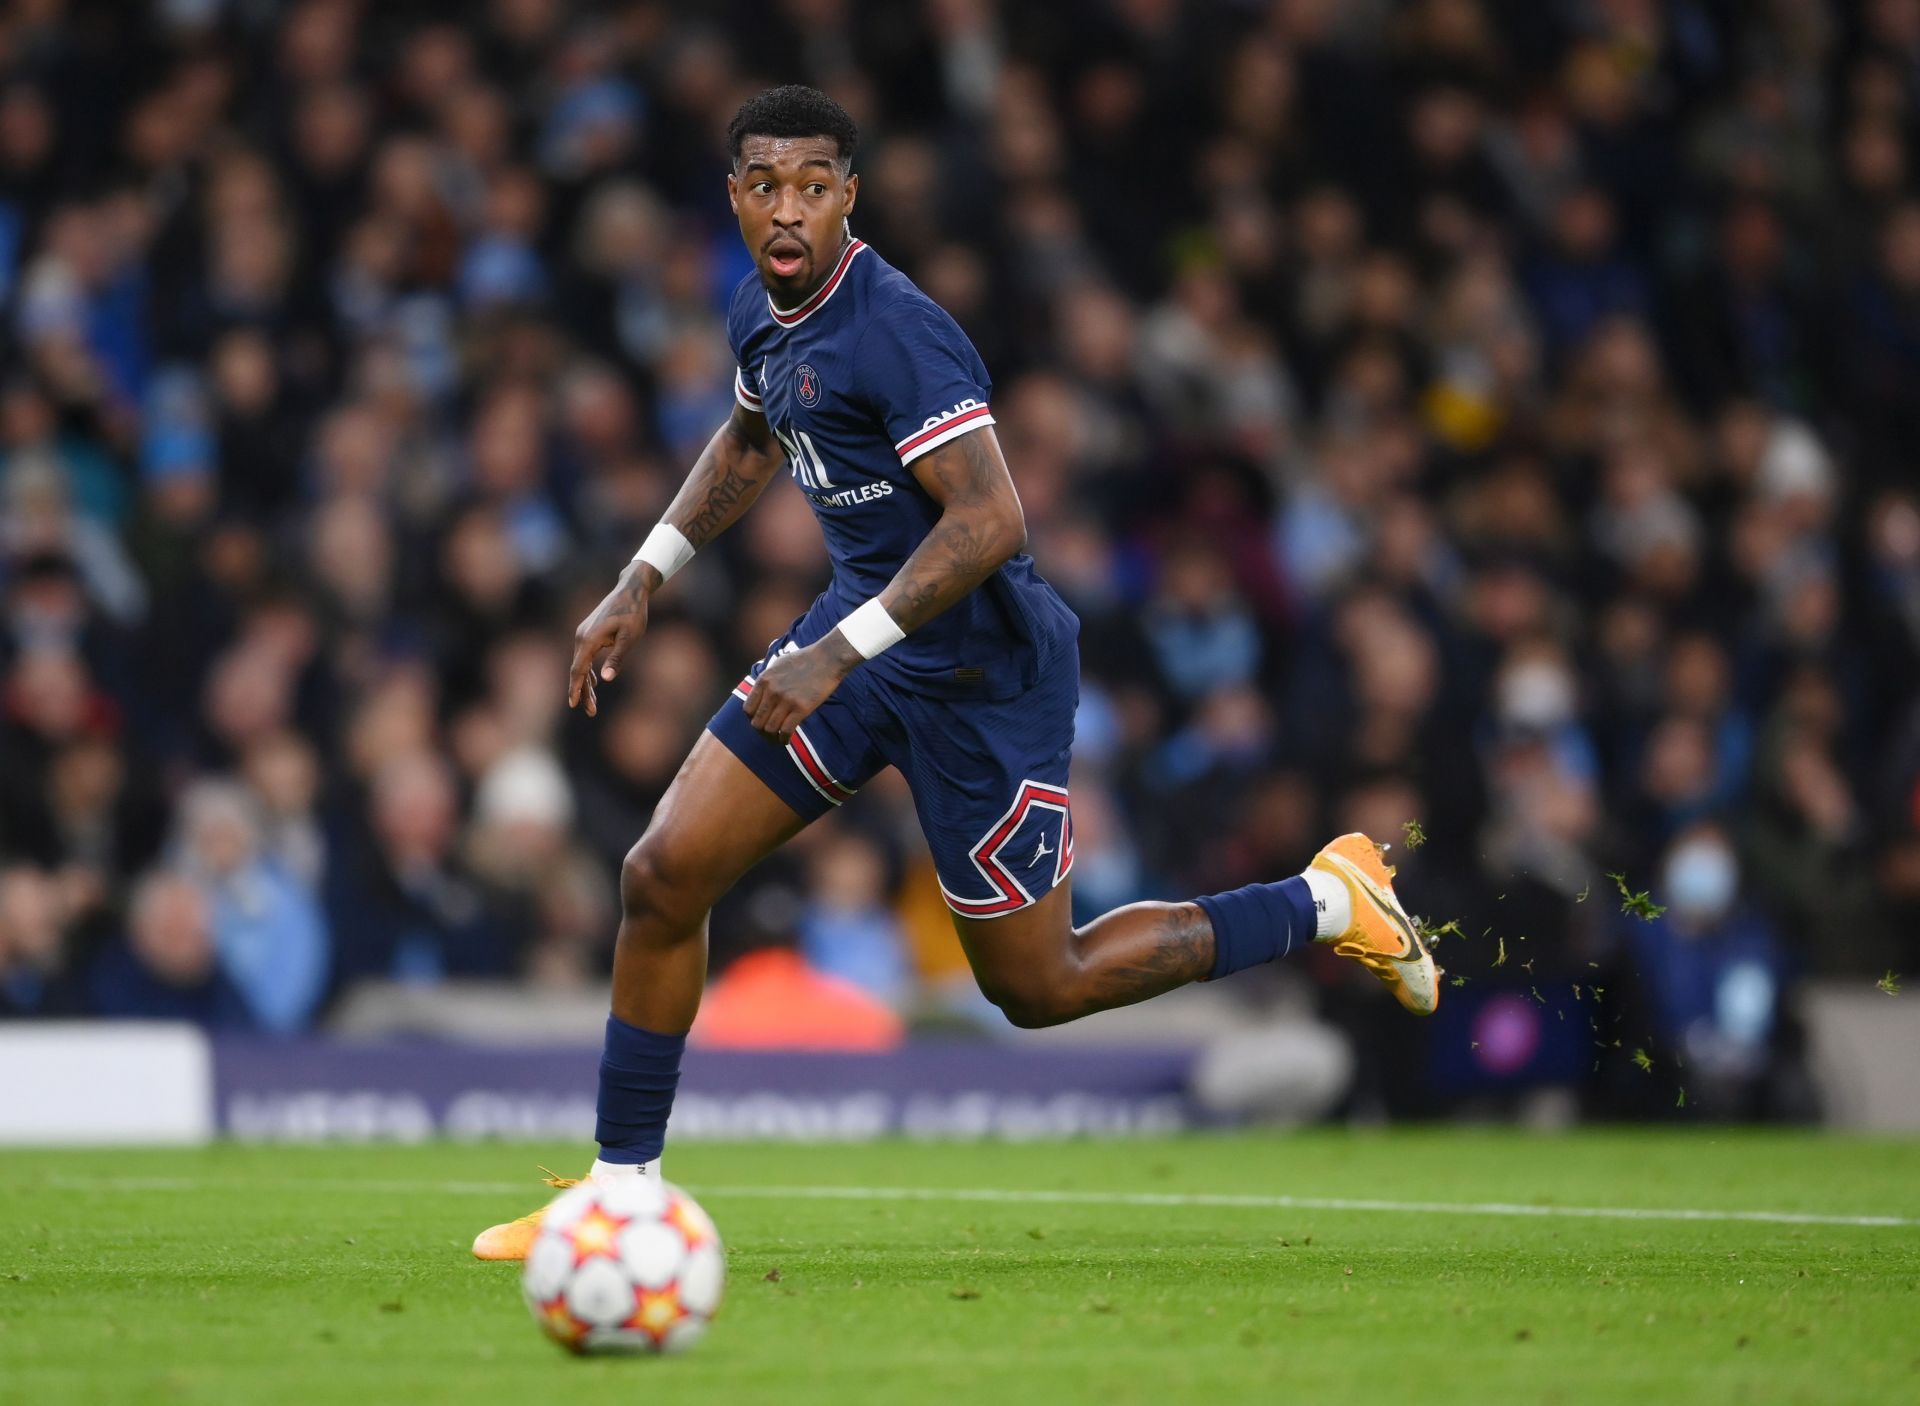 Presnel Kimpembe believes now is the time for the team to show character.